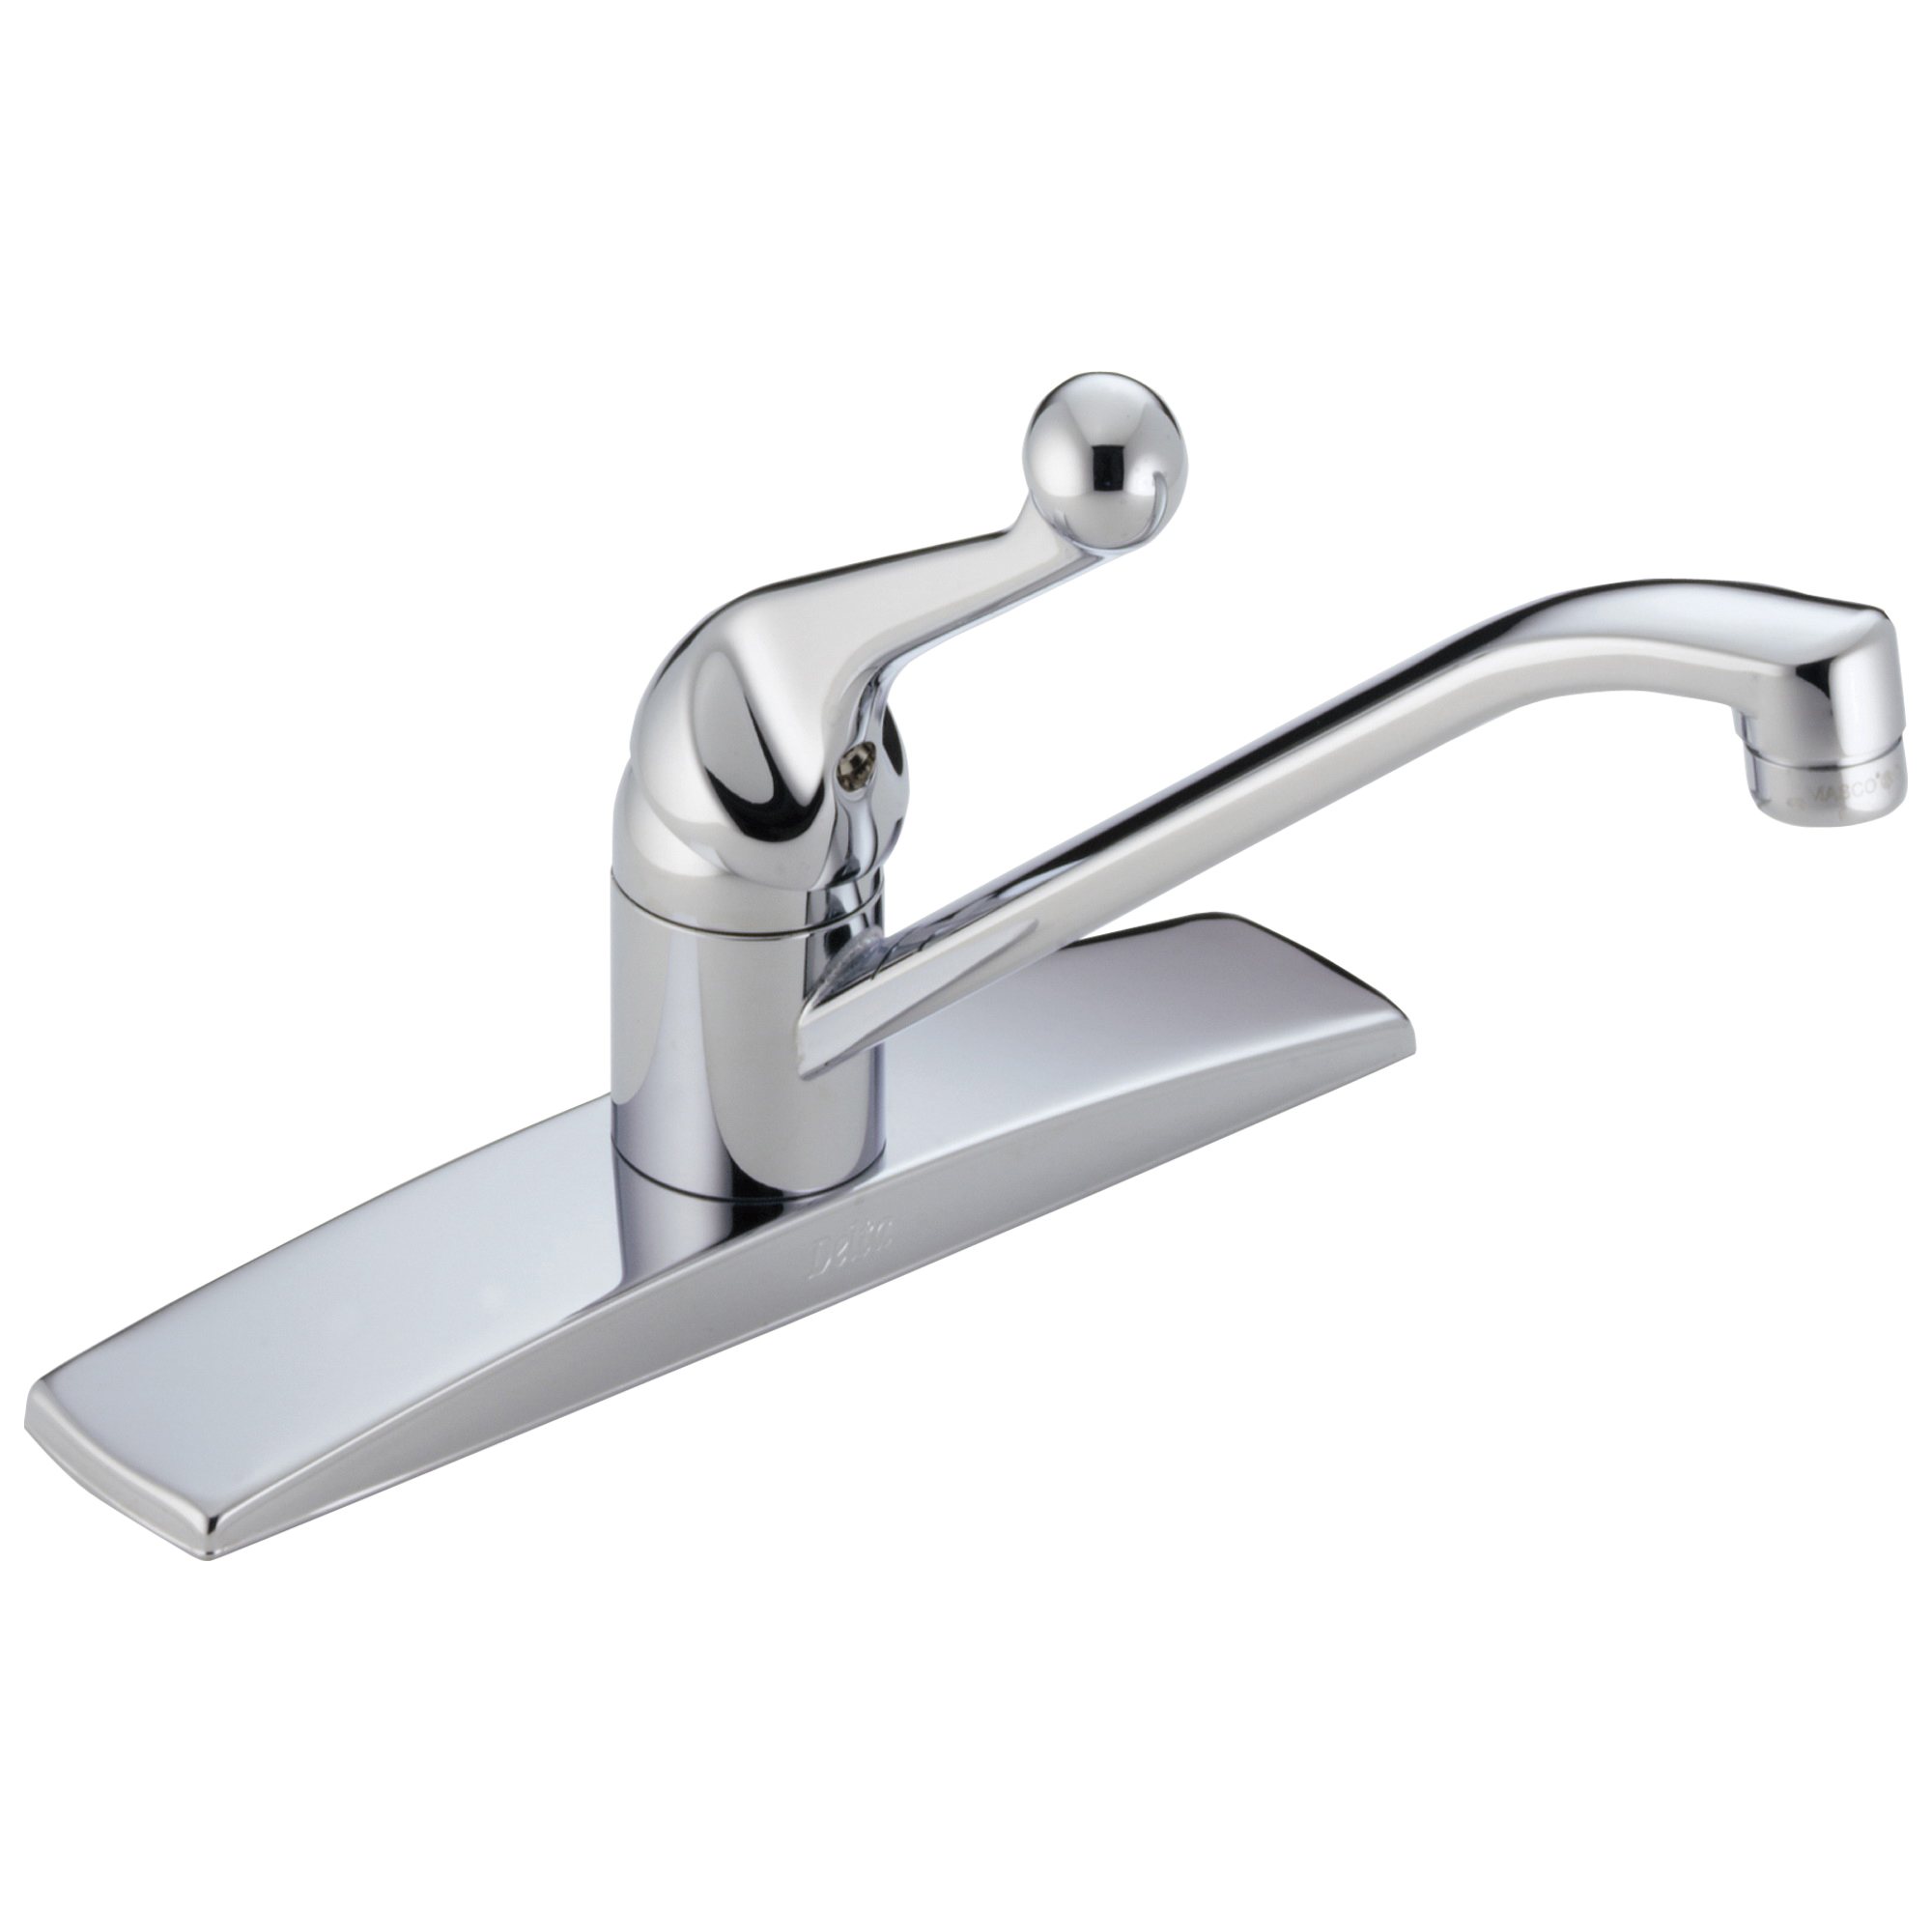 DELTA® 100LF-WF Classic Kitchen Faucet, 1.8 gpm Flow Rate, 8 in Center, Swivel Spout, Polished Chrome, 1 Handles, Domestic